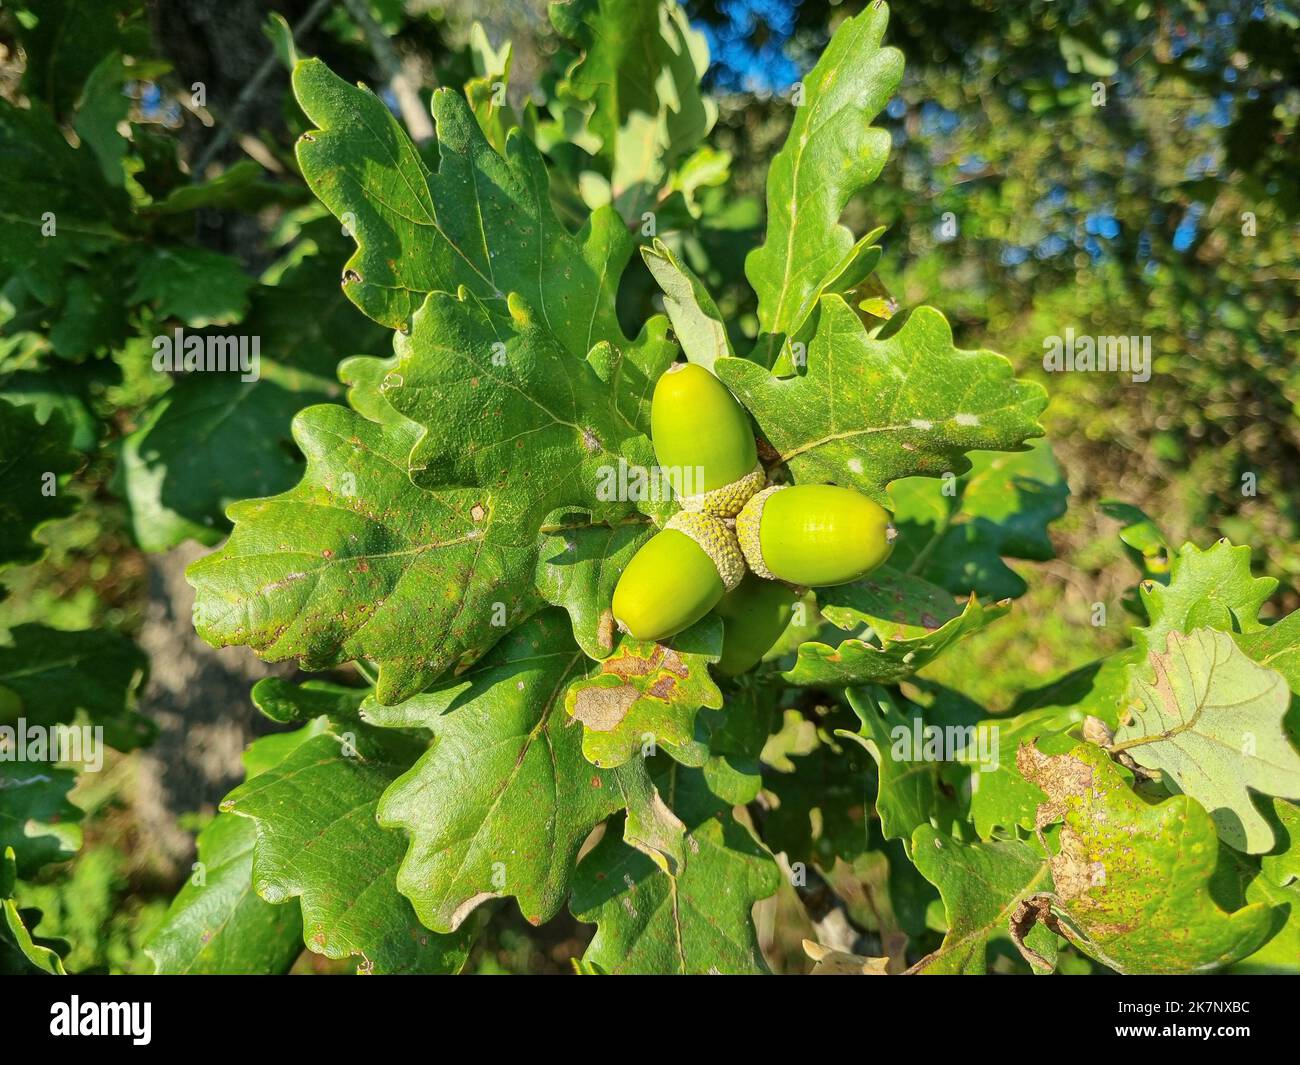 Close up view of Acorns fruits on oak tree branch in forest autumnal ecosystem Stock Photo